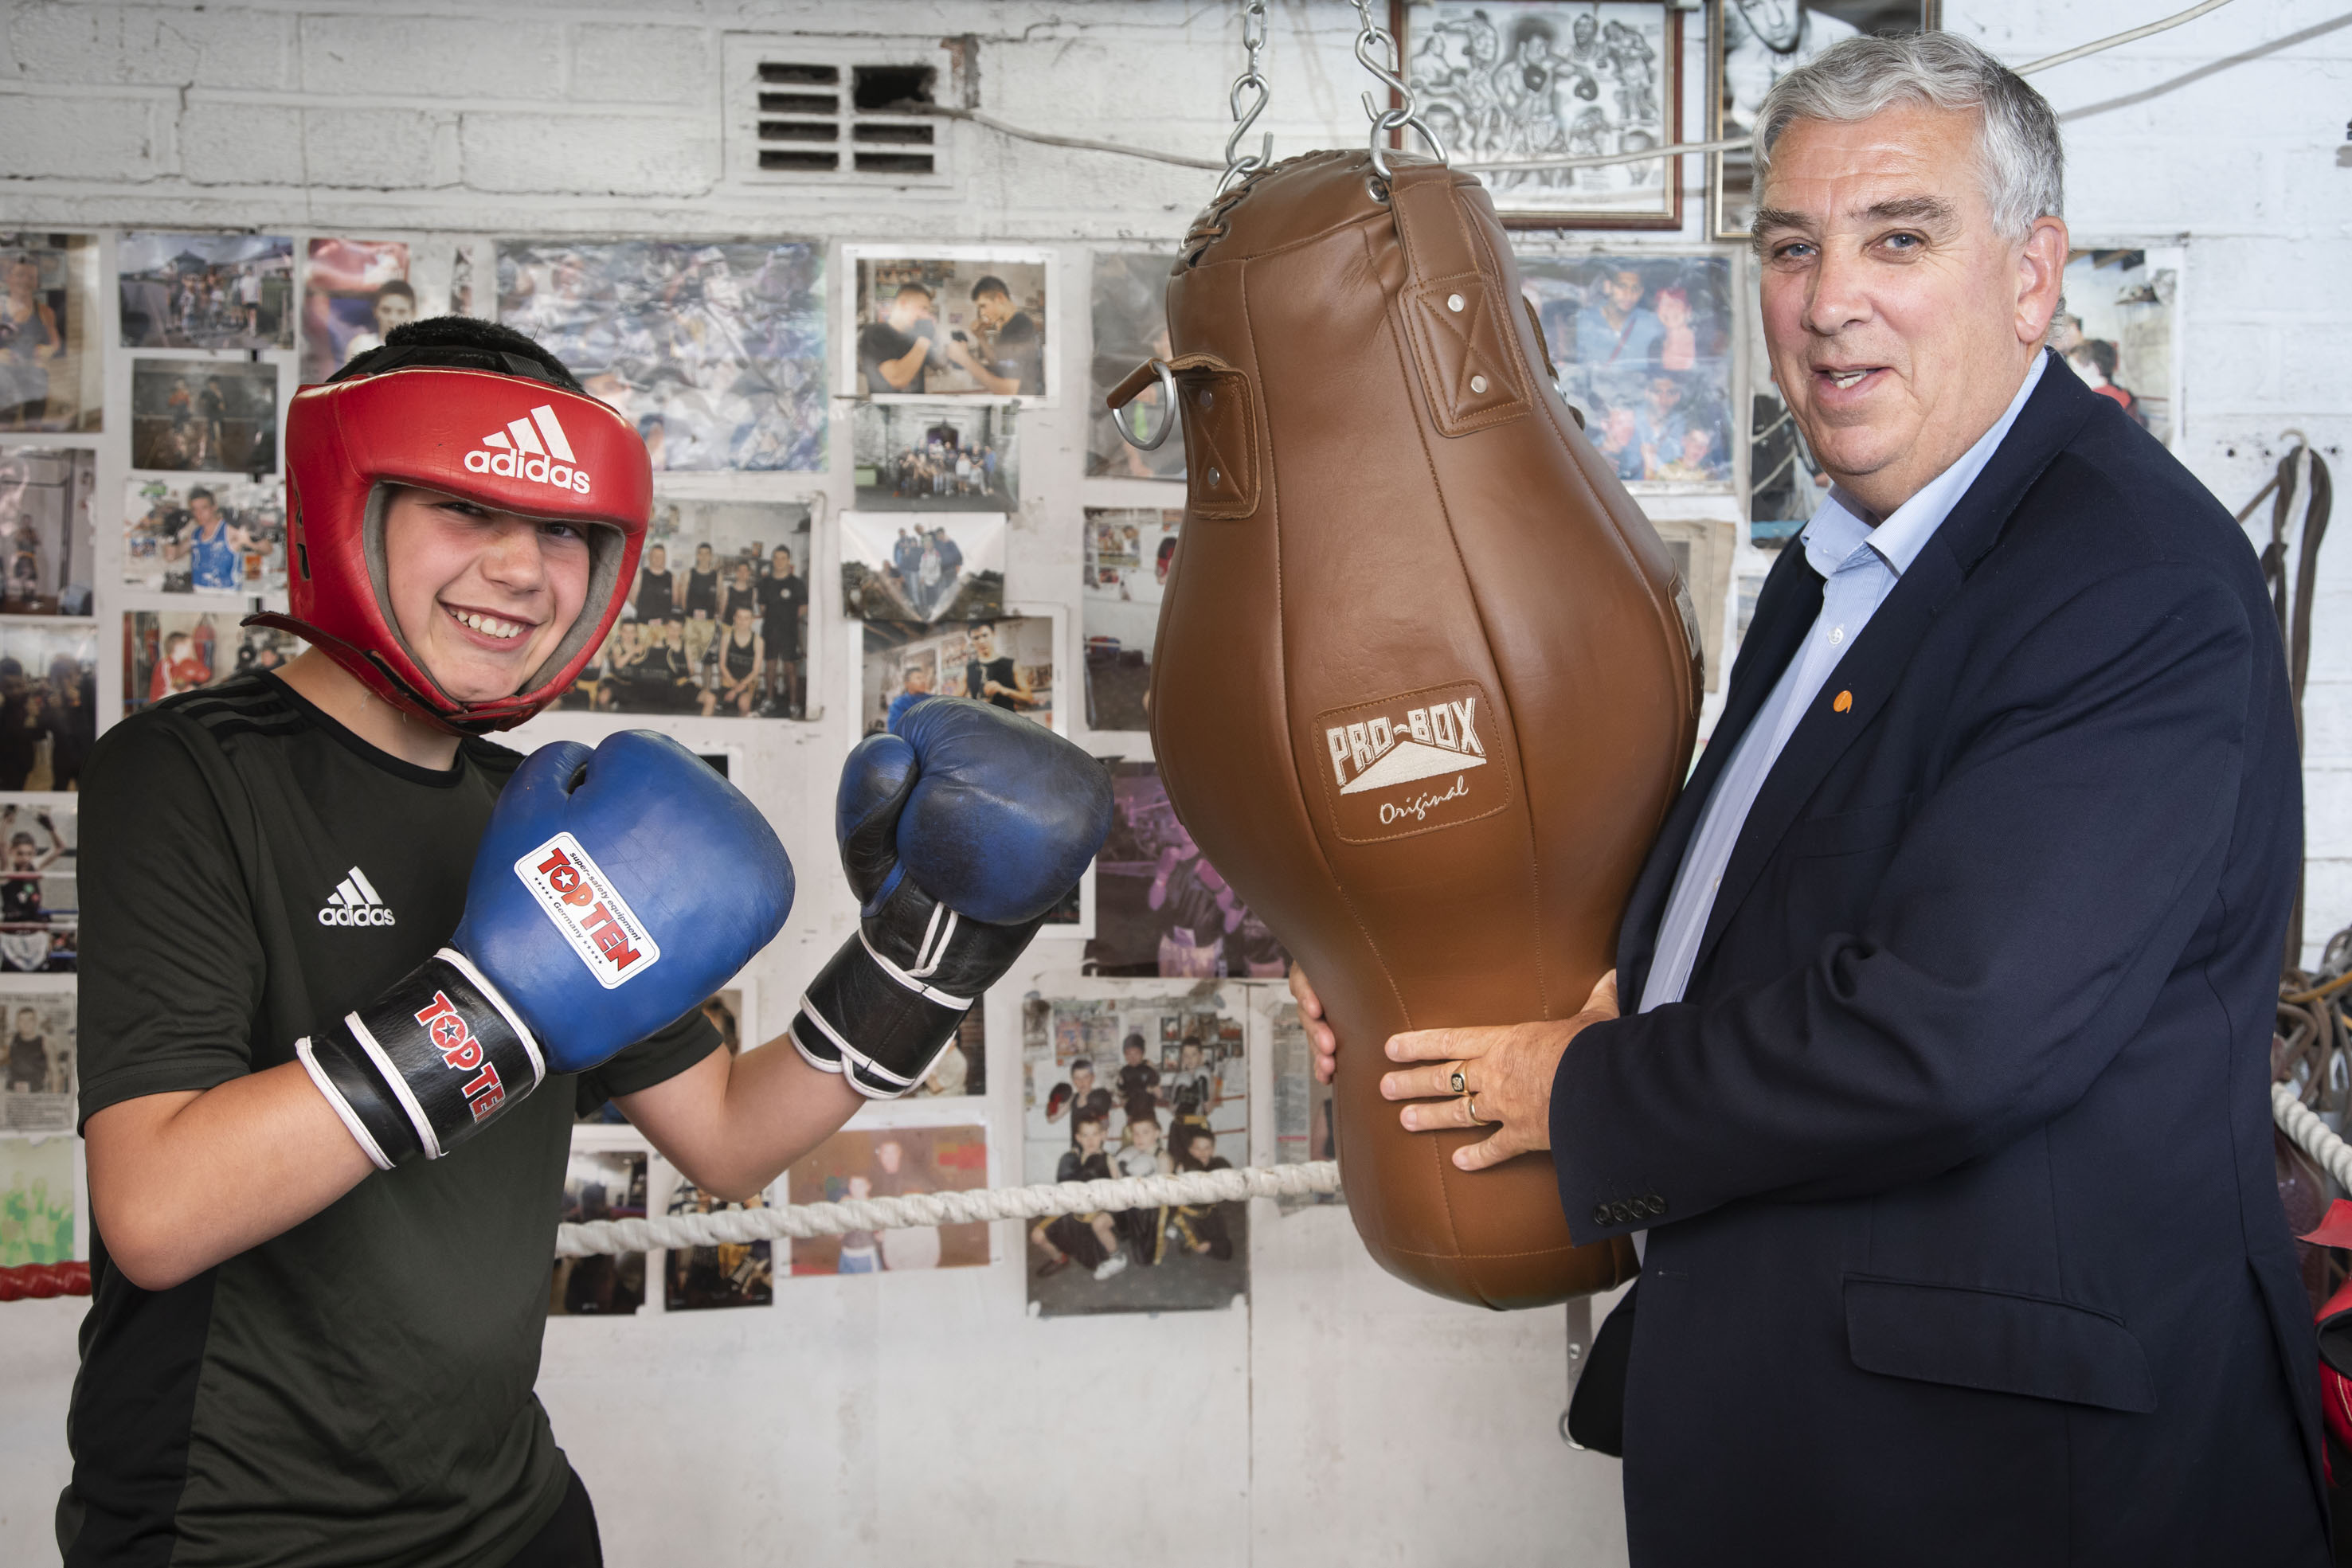 Police boss urges local companies to help boxing club punch above weight